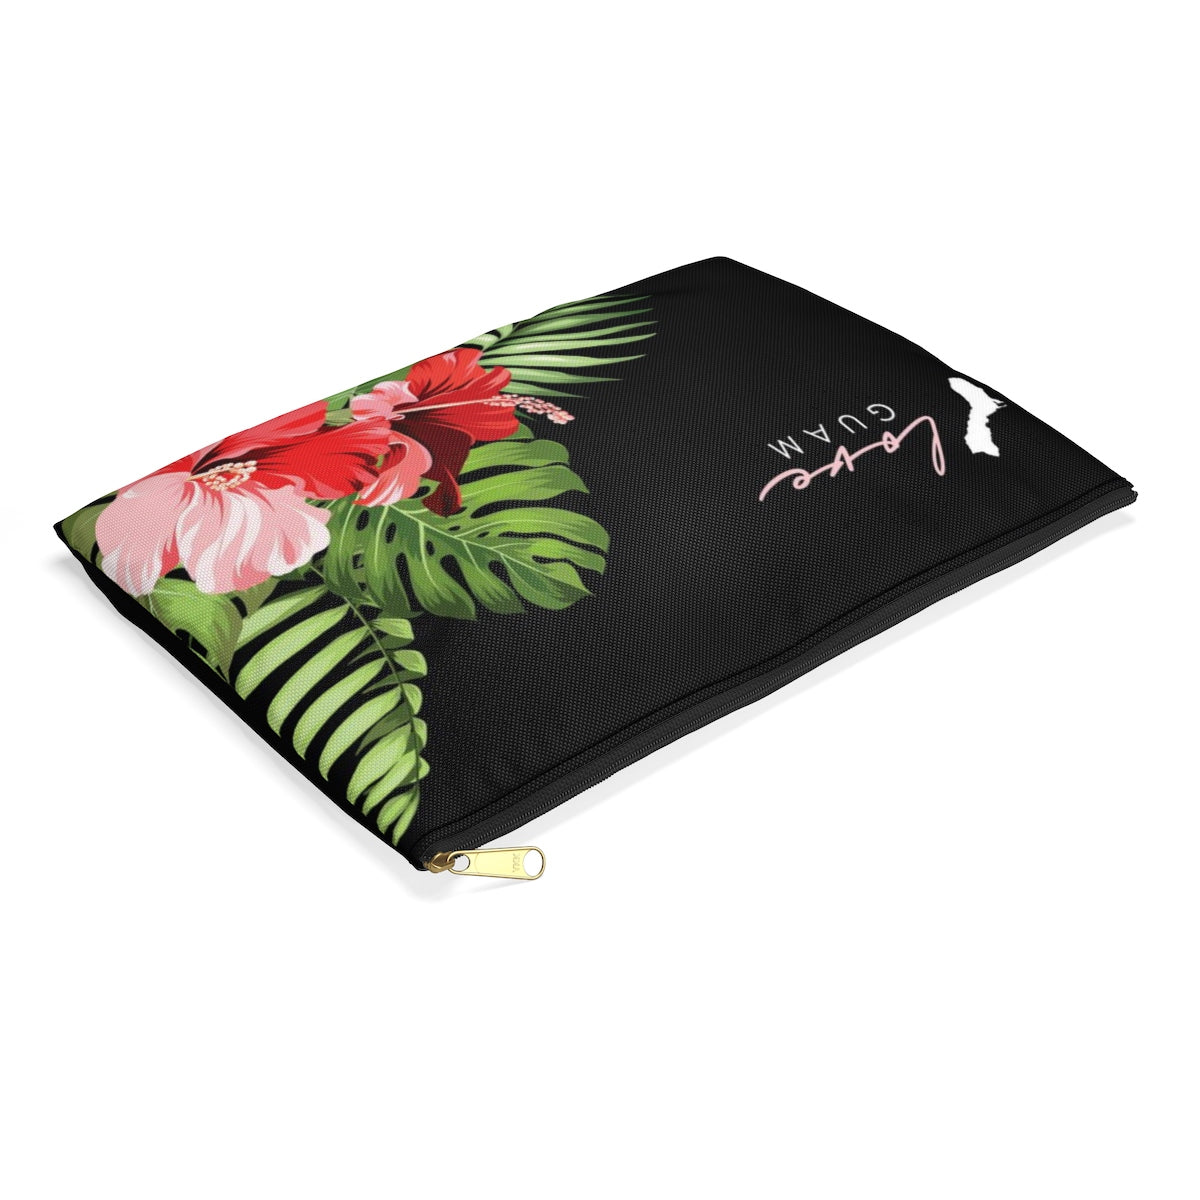 Love Guam Red Hibiscus Accessories Carry All Pouch